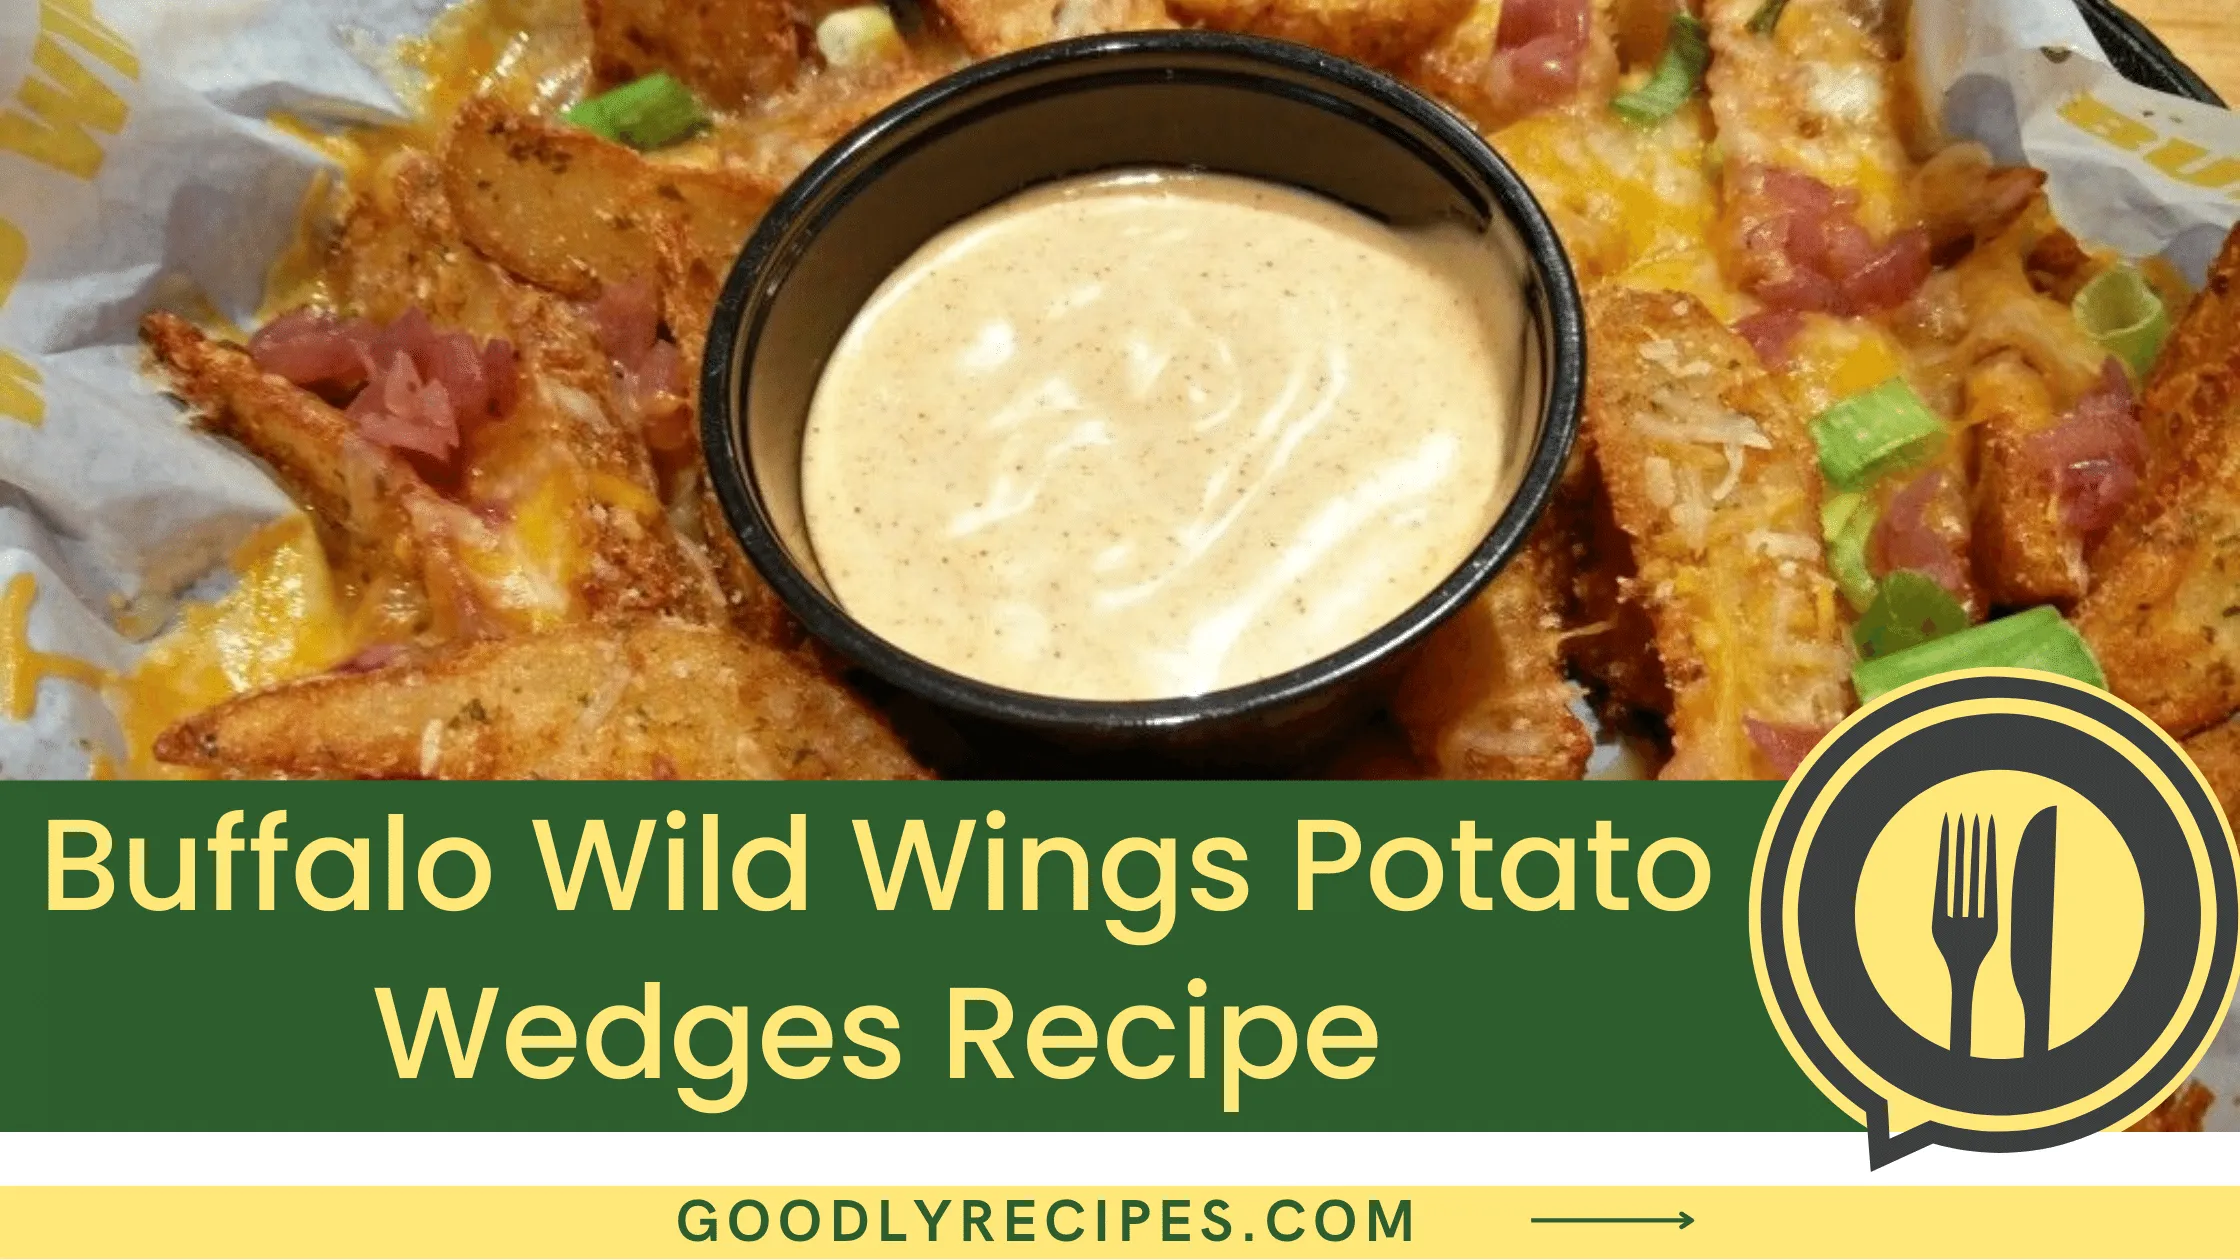 What Are Buffalo Wild Wings Potato Wedges?